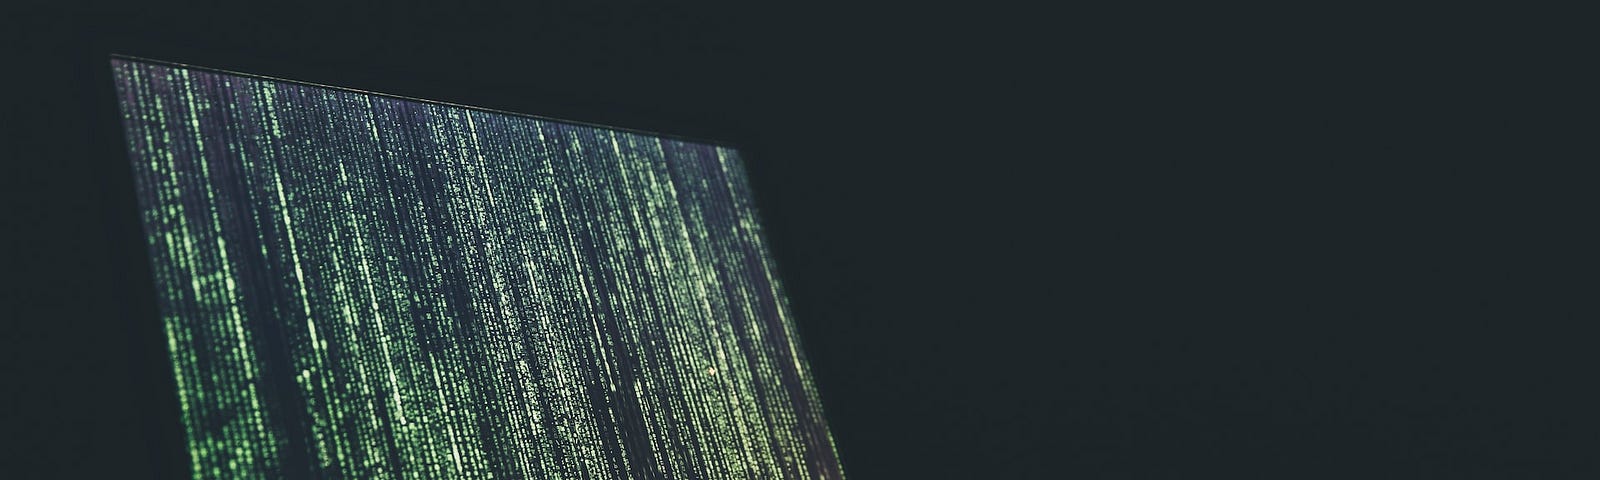 IMAGE: A Matrix-like screen in an open laptop on a dark background